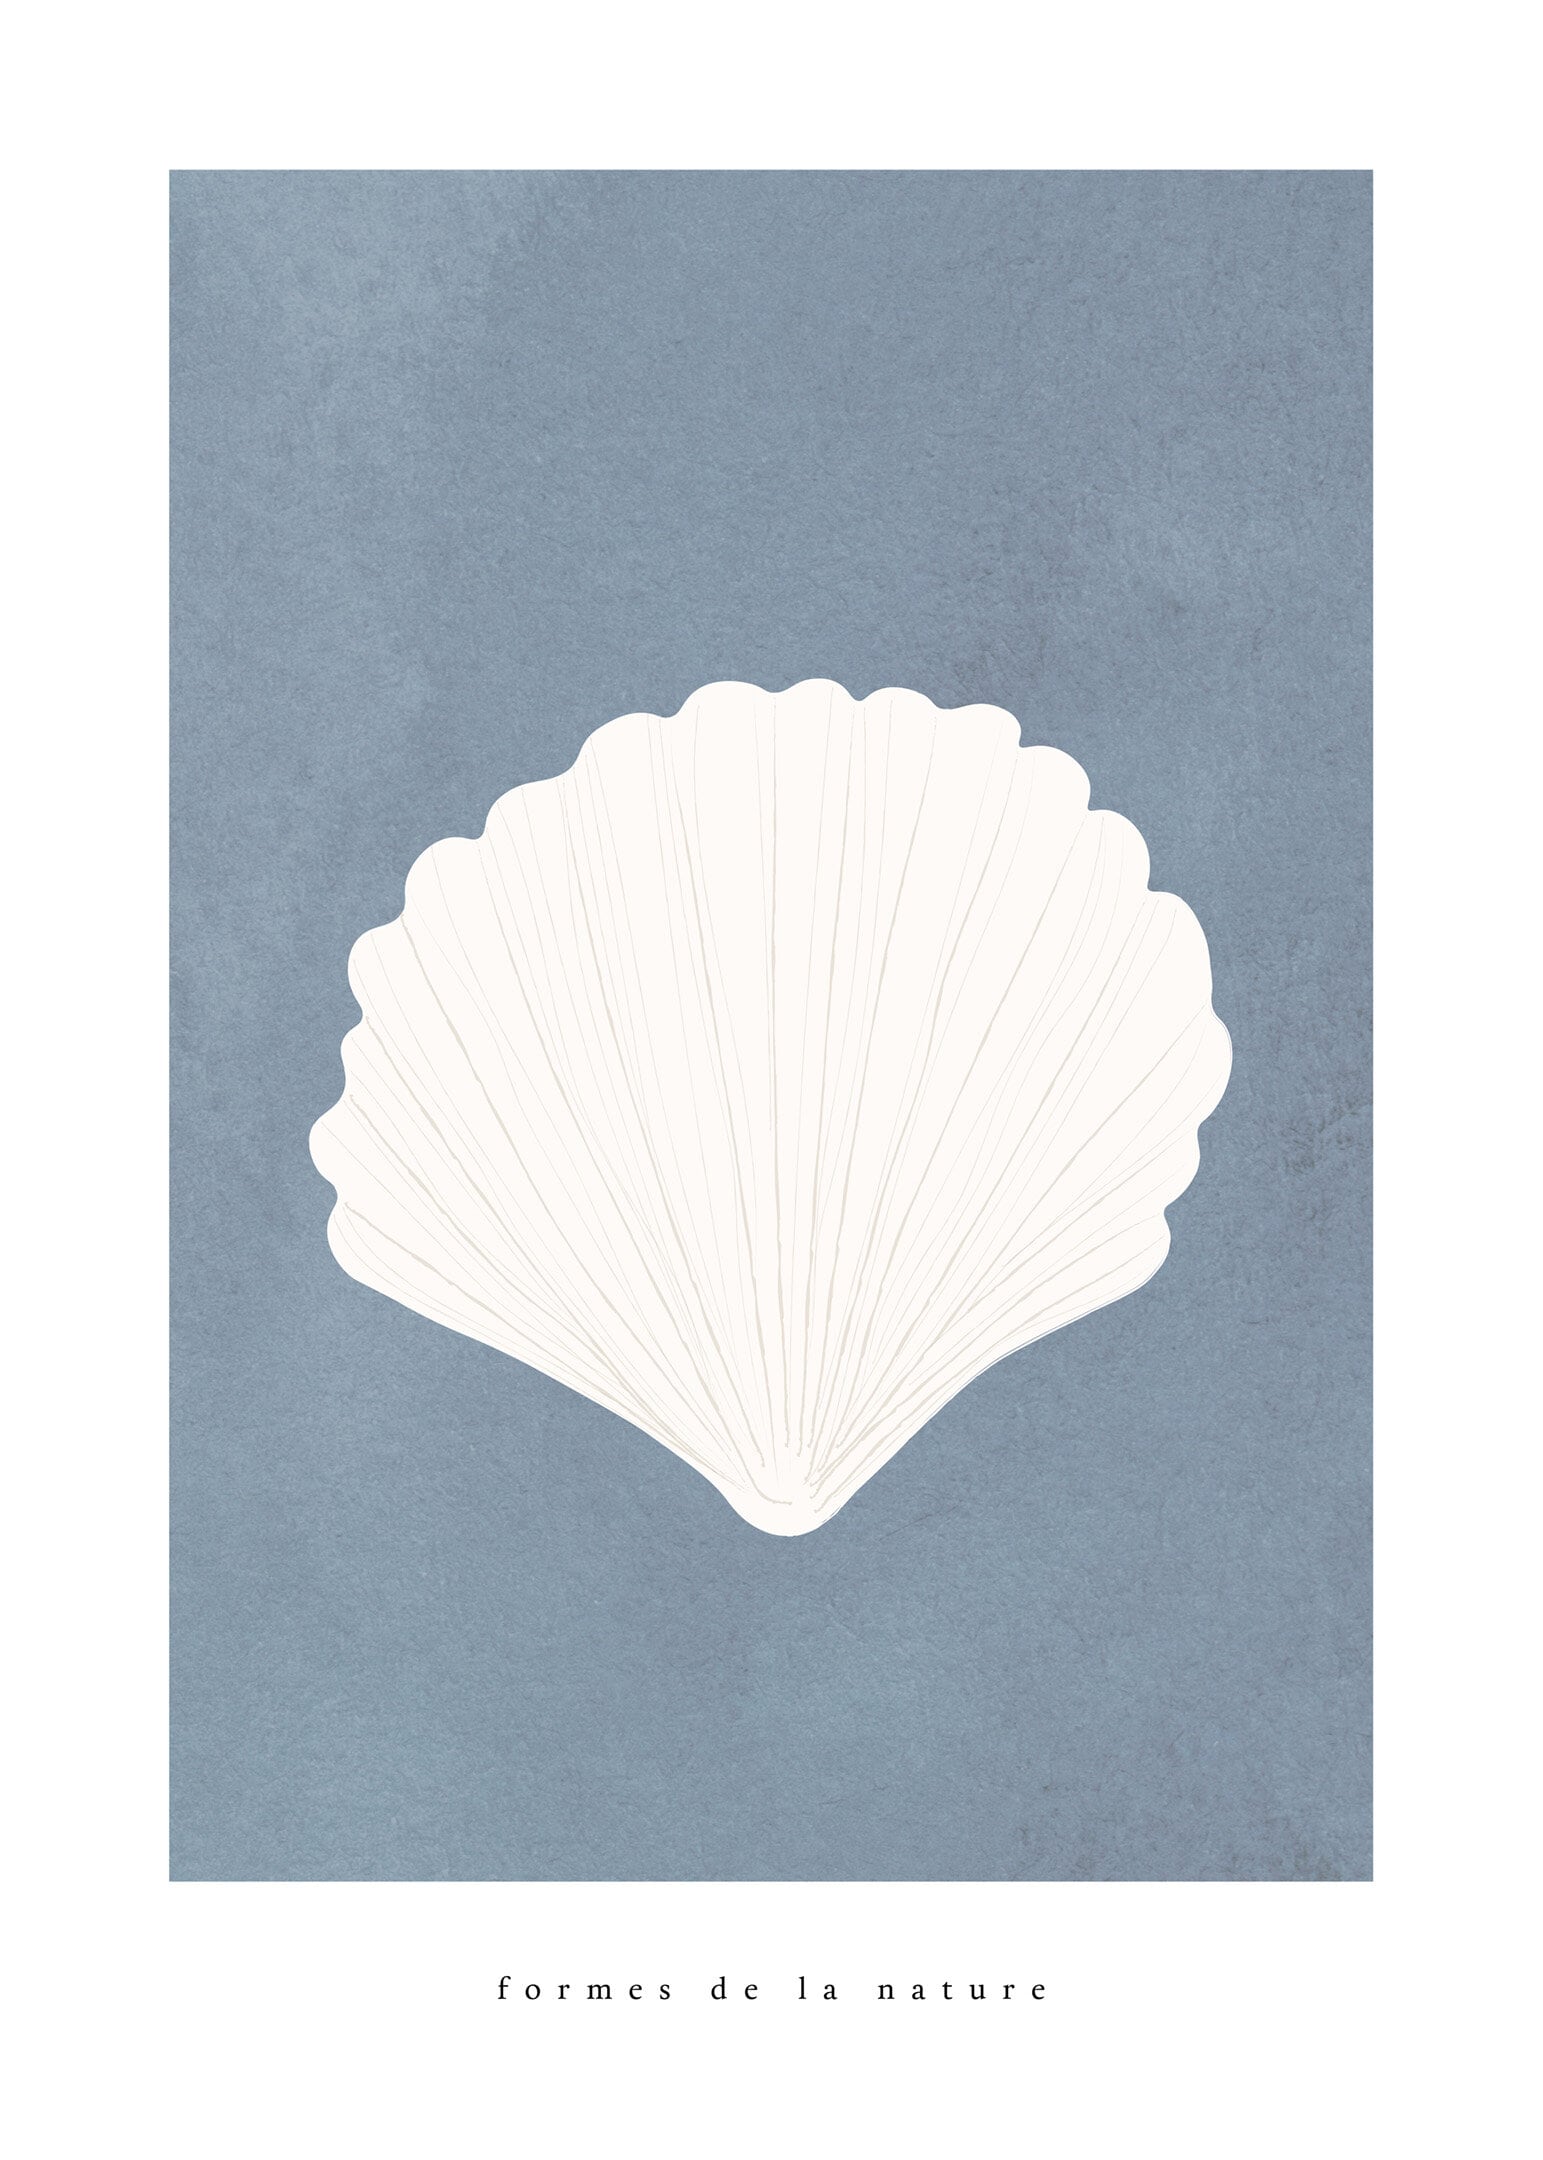 Conch shell poster